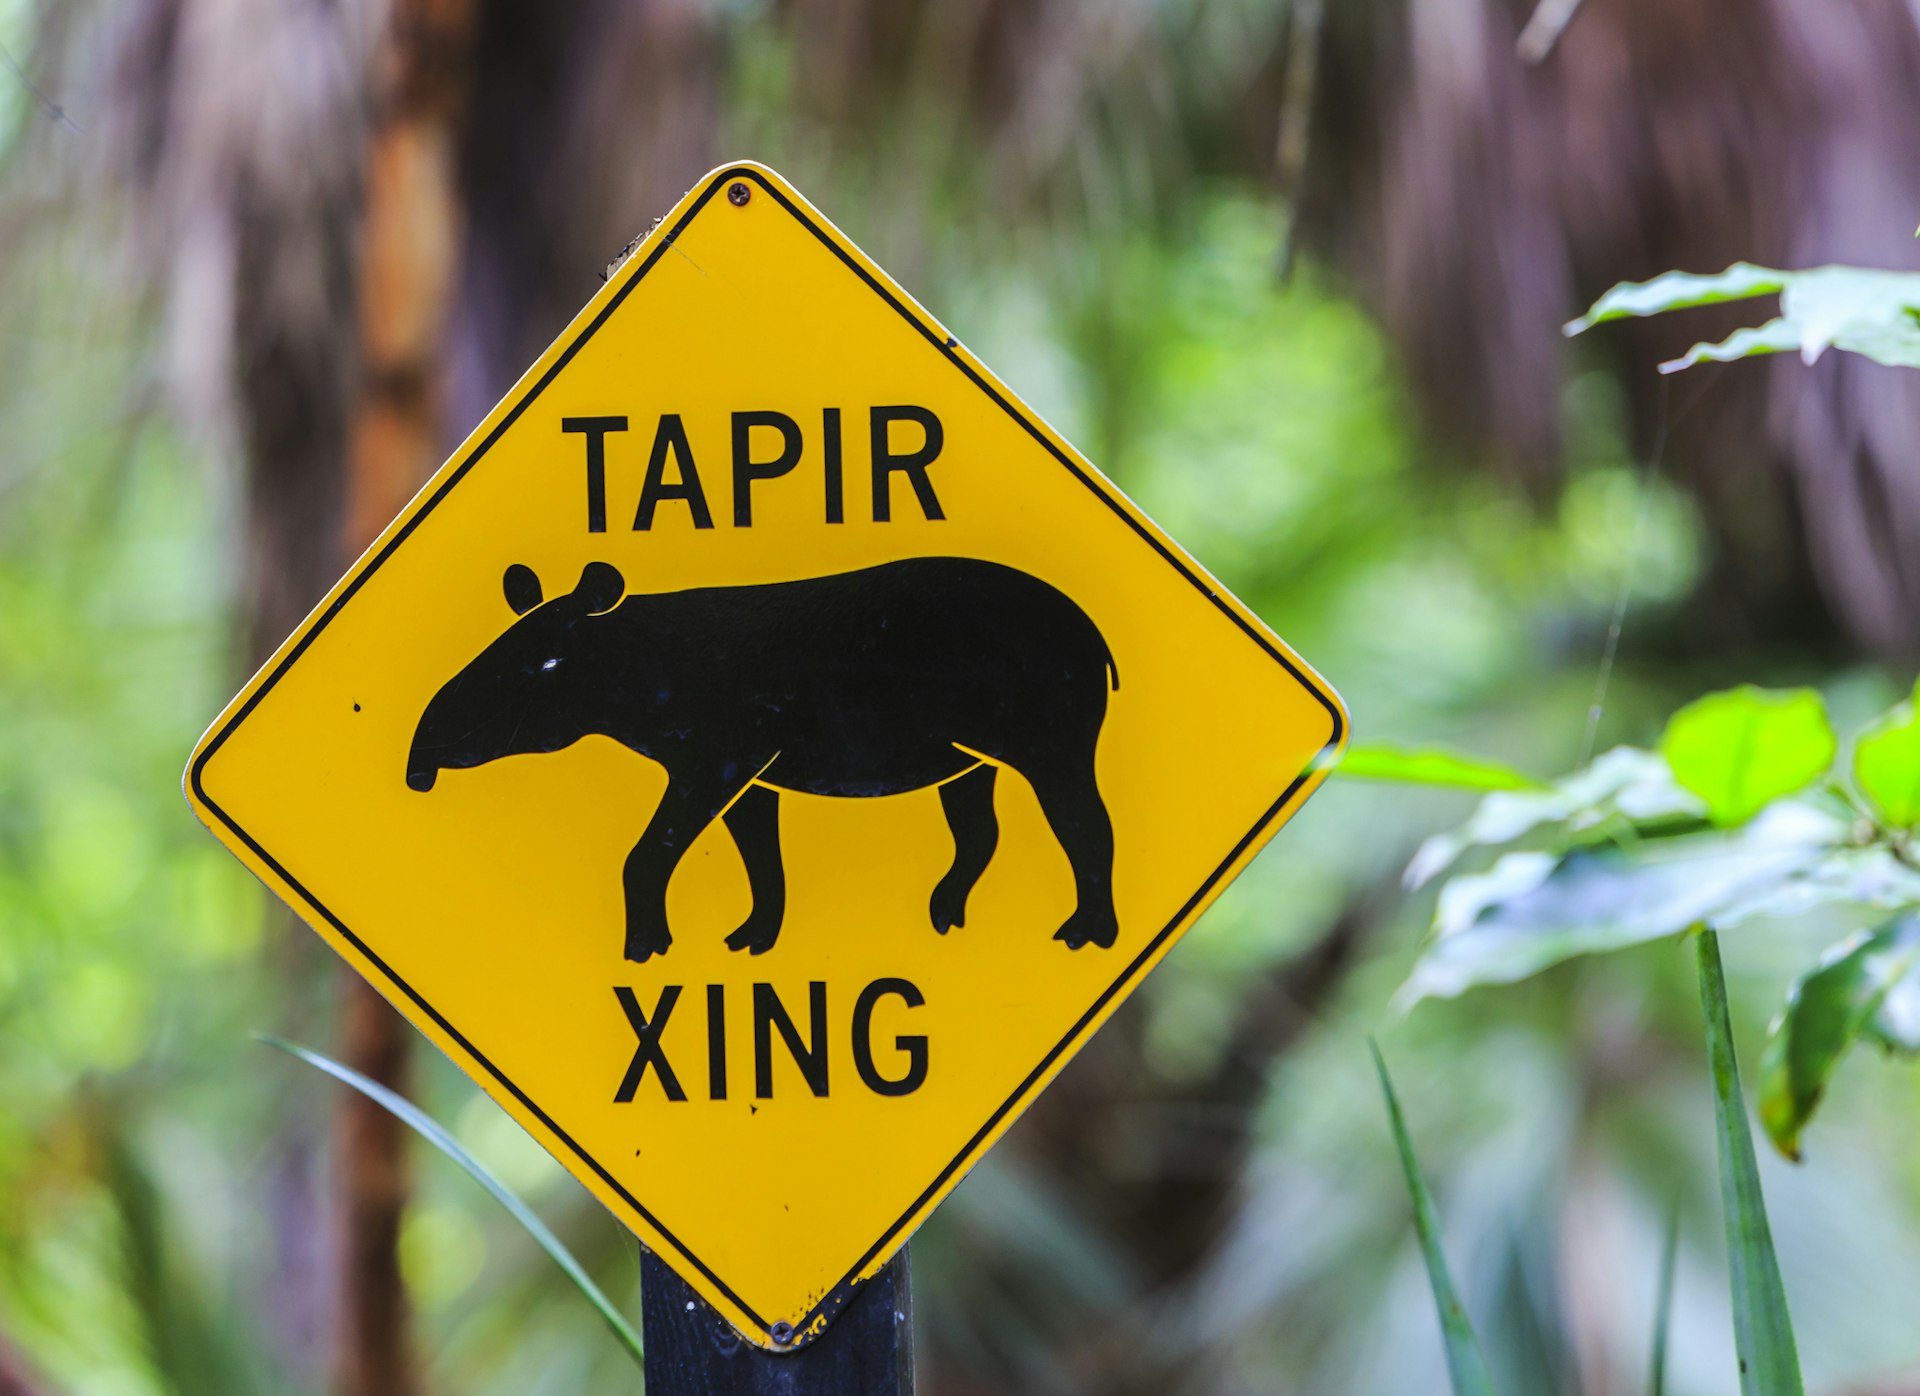 A black-and-yellow road sign with the outline of a tapir on it and the text "TAPIR XING"